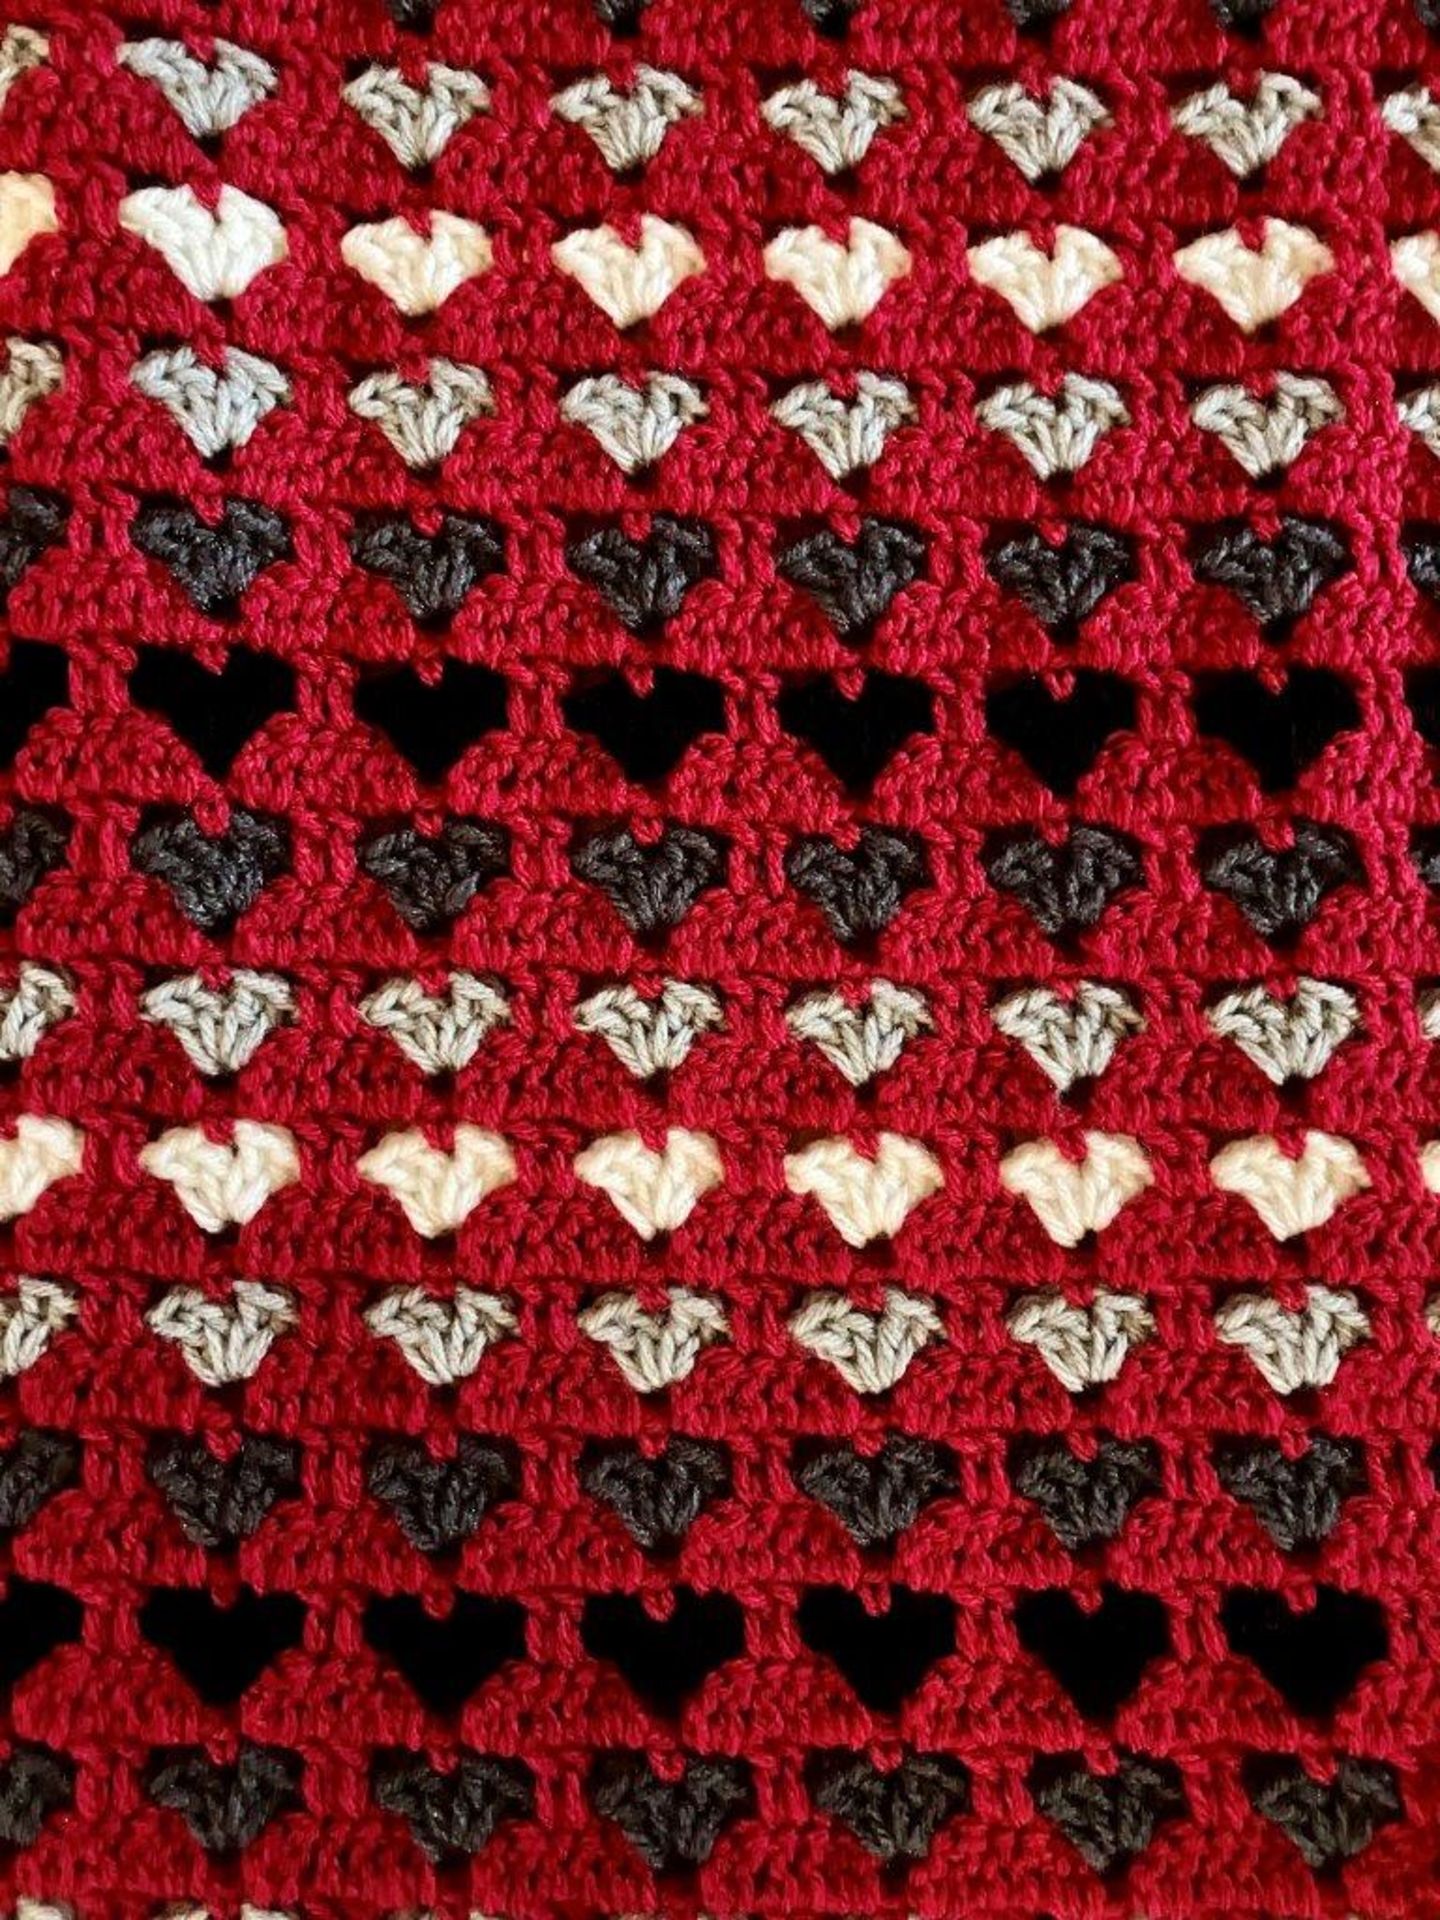 BEAUTIFUL HANDCRAFTED BABY AFGHAN - Image 2 of 3